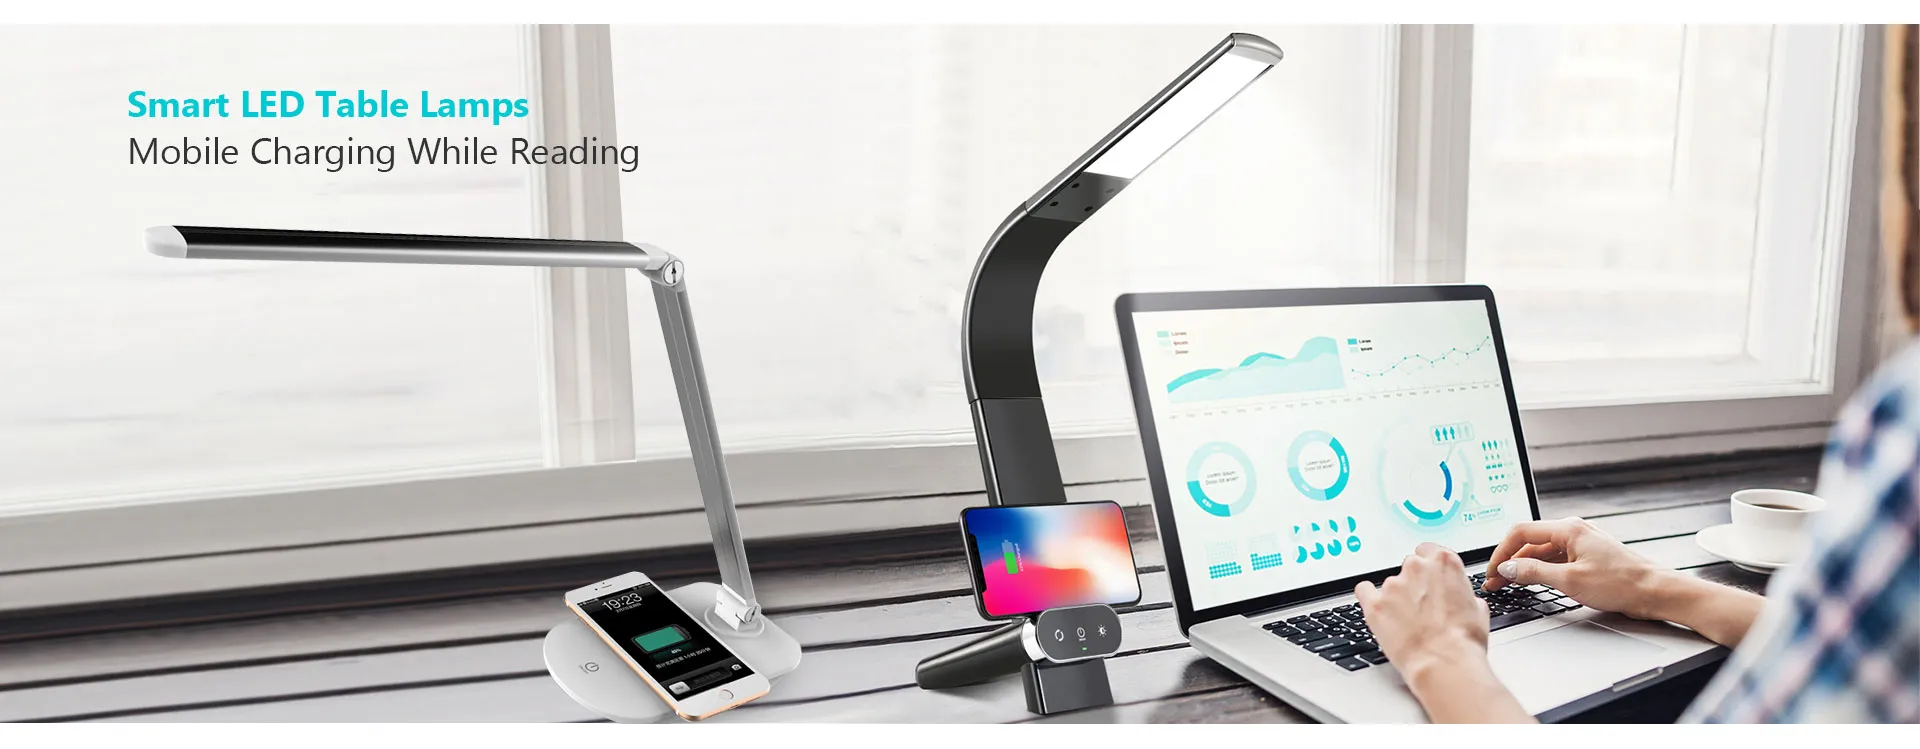 Smart LED Table Lamps